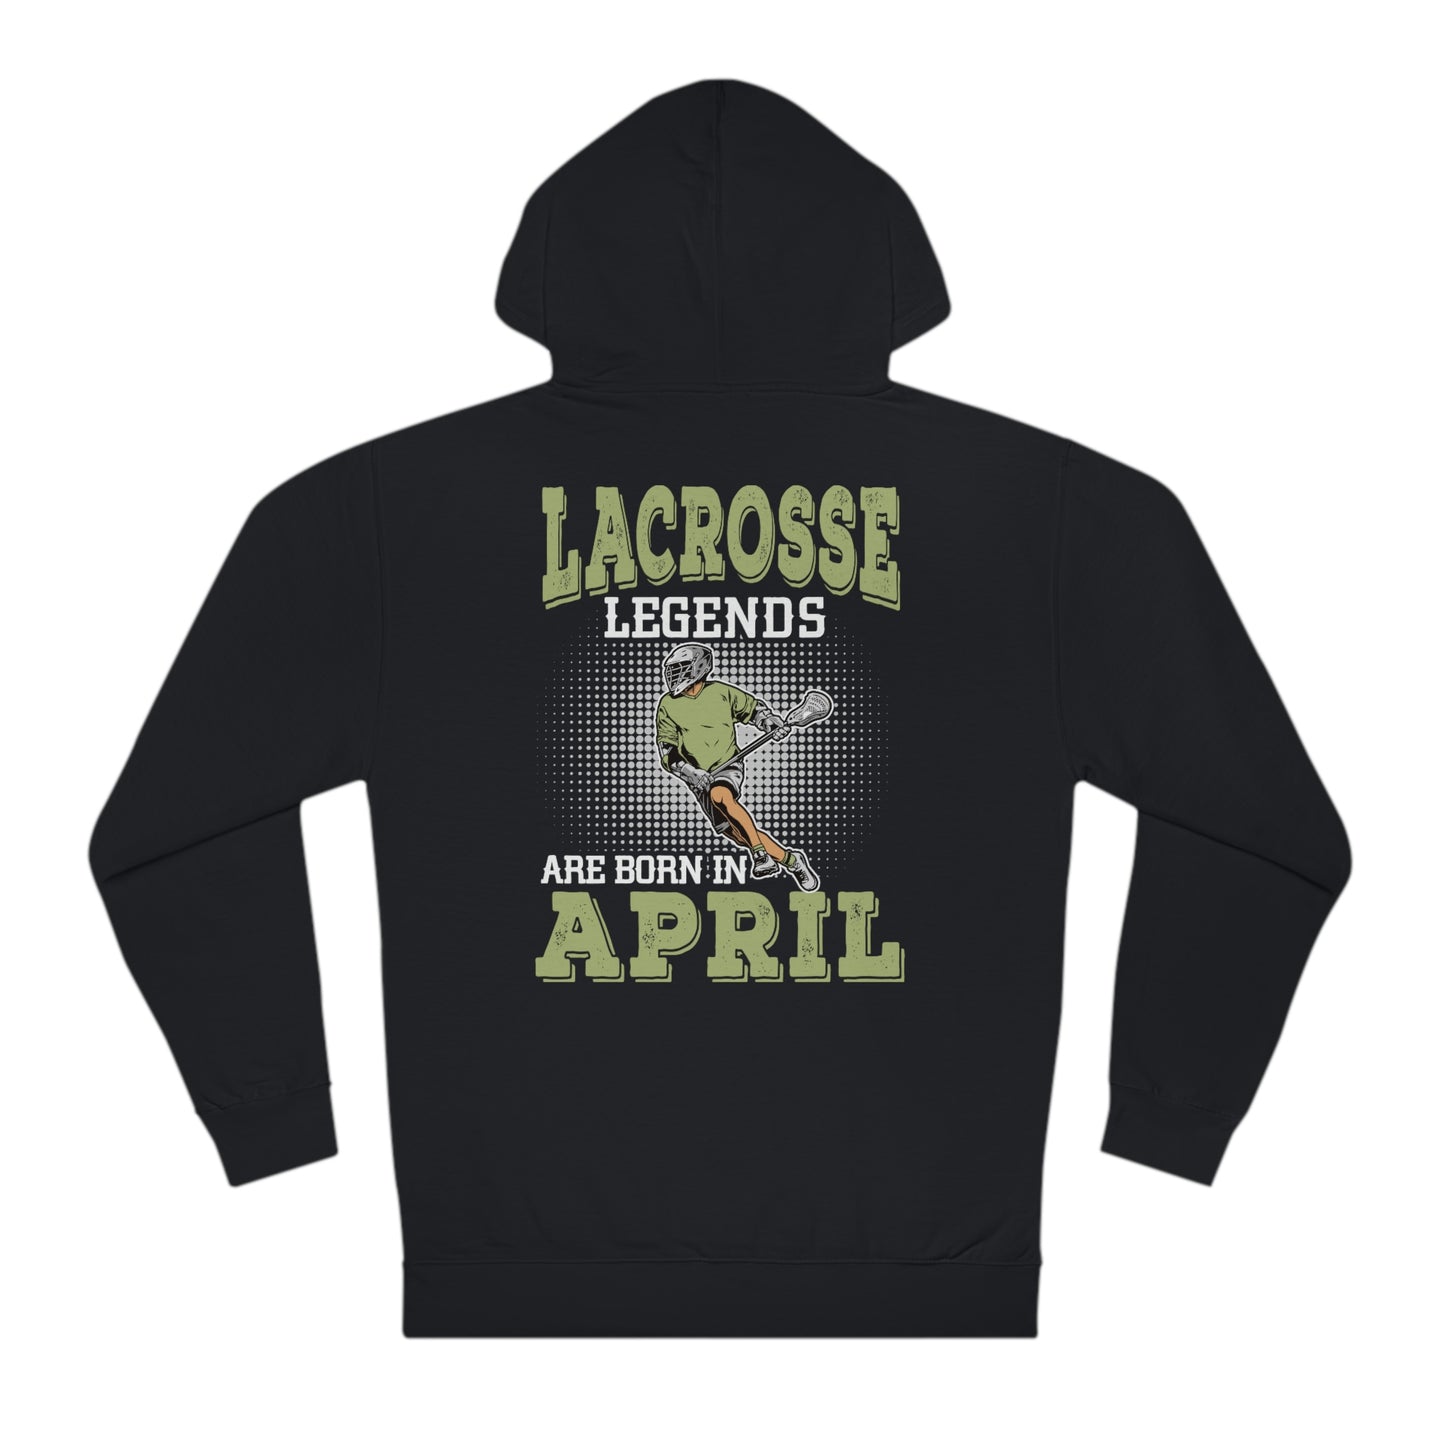 LACROSSE LEGENDS ARE BORN IN APRIL Hoodie